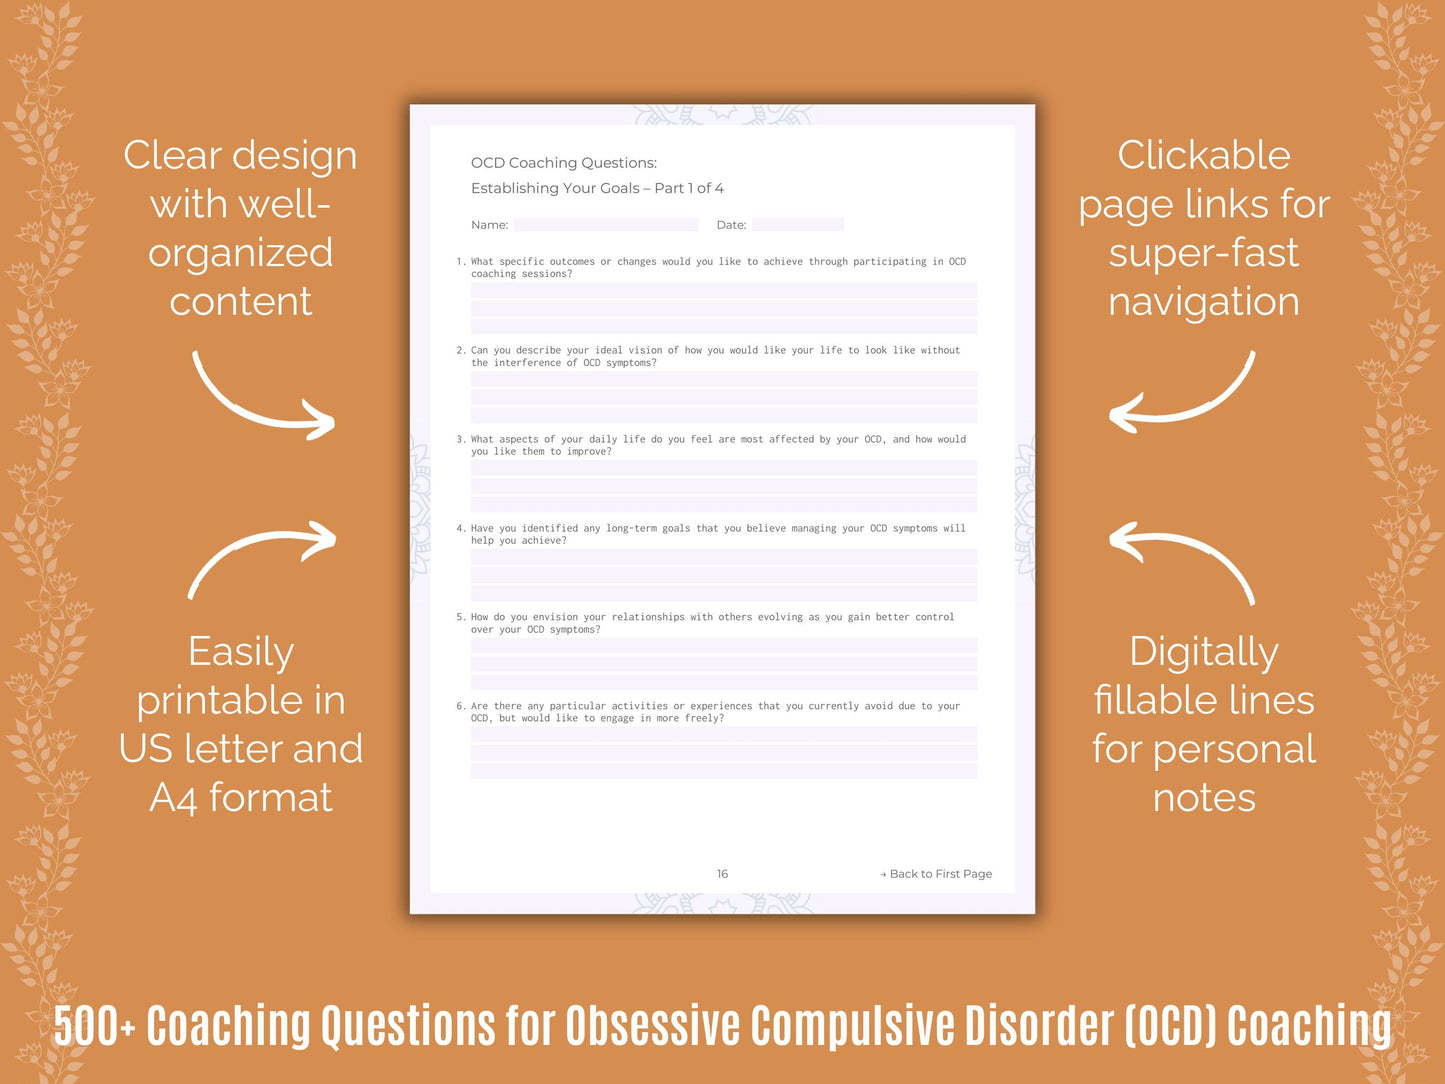 Obsessive Compulsive Disorder (OCD) Coaching Questions